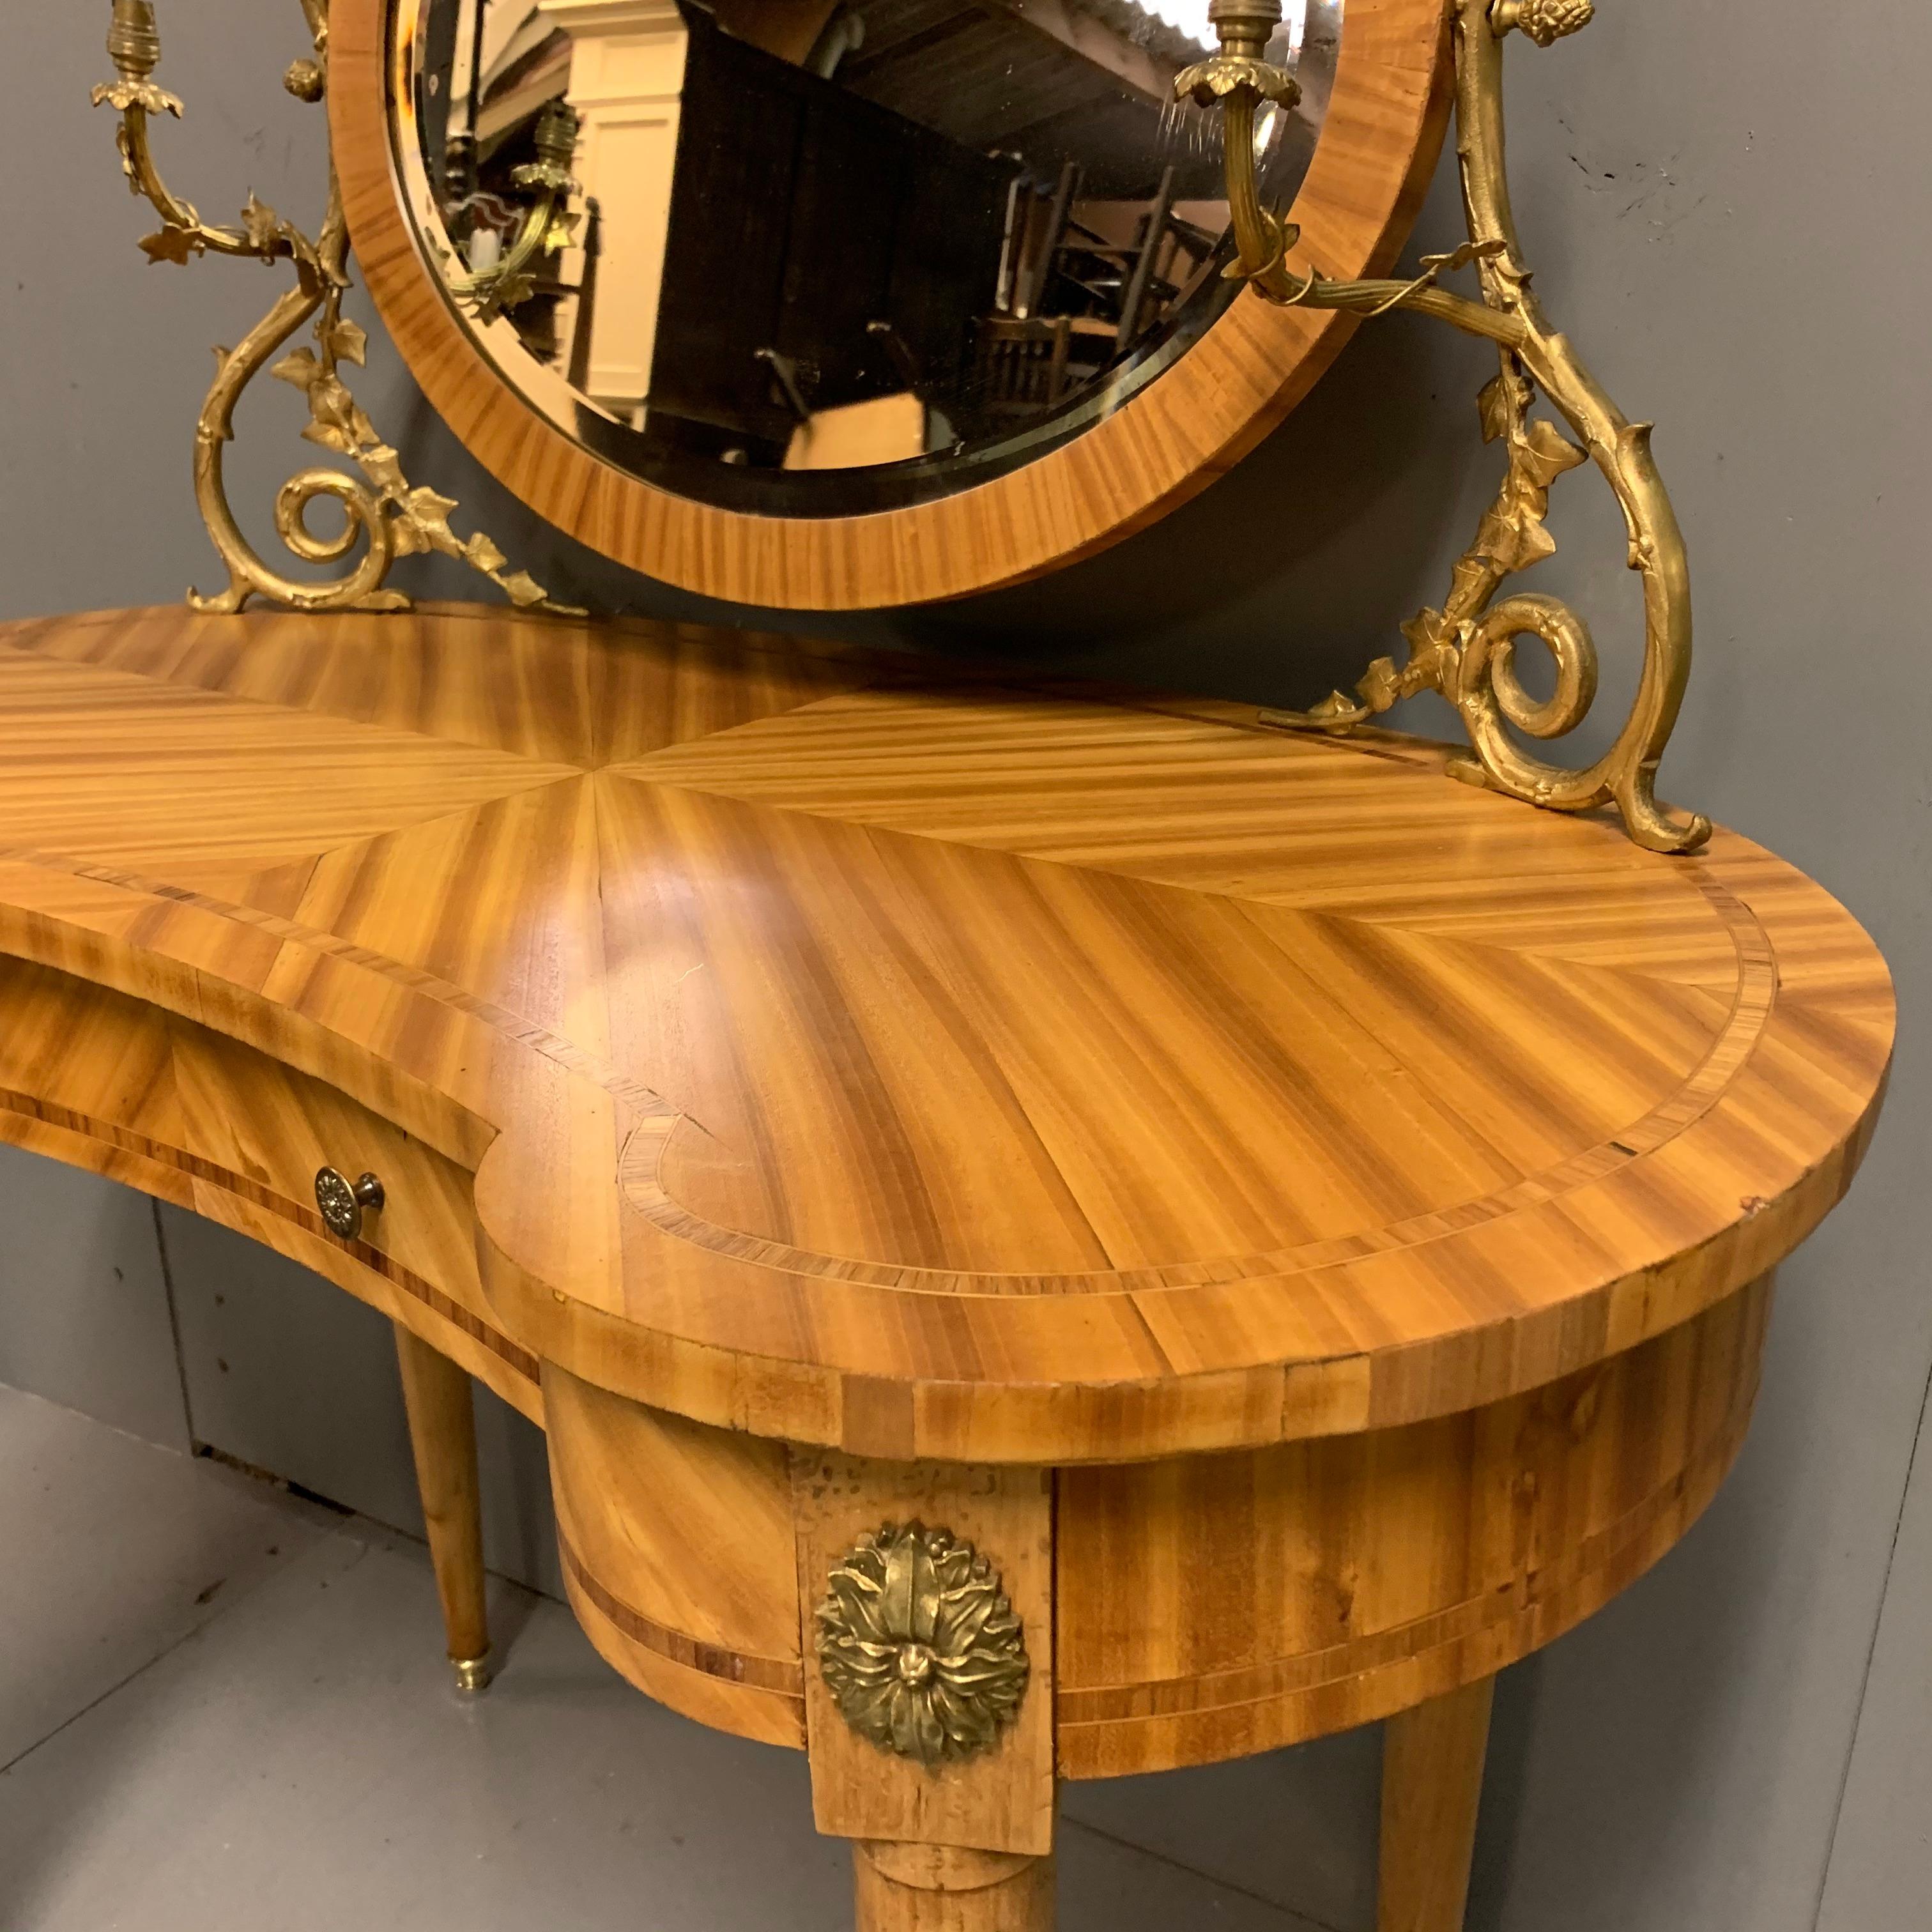 Antique French Bleached Mahogany Kidney Shape Dressing Table with Sconces im Zustand „Gut“ im Angebot in Uppingham, Rutland